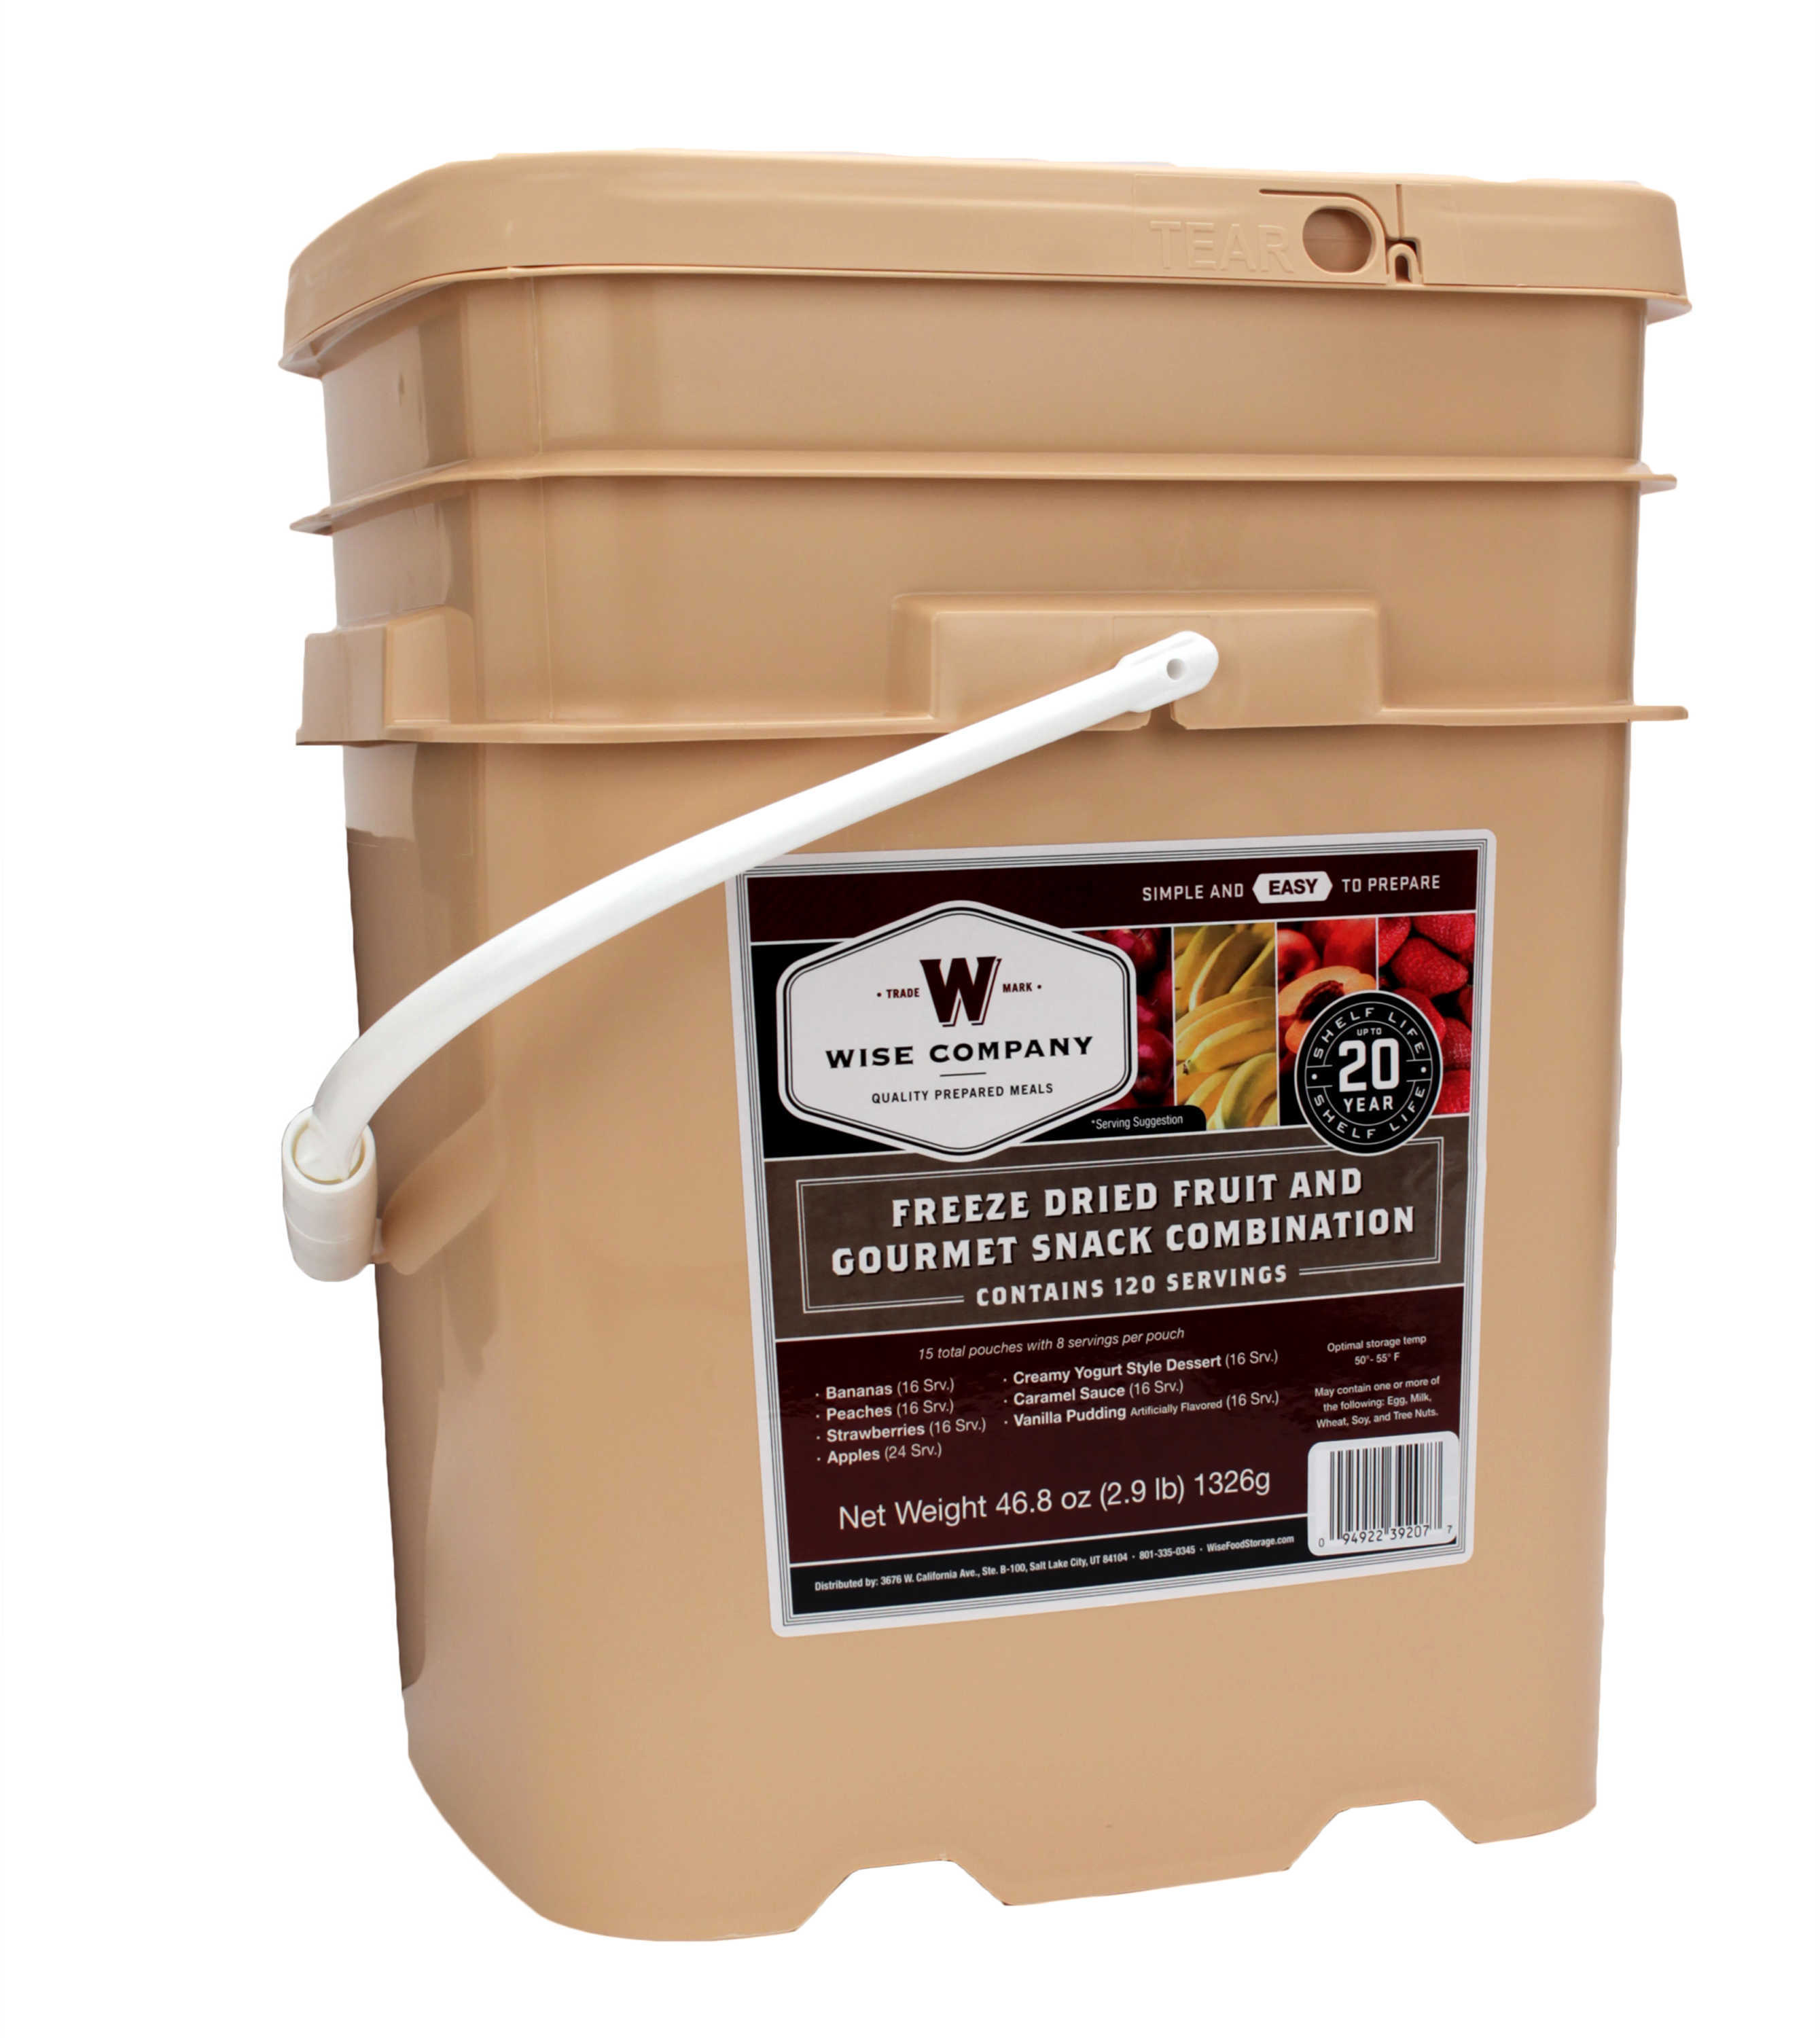 Wise Company 25 Year Shelf Life Emergency Freeze Dried Entrees, 120 Servings Md: 40-50120